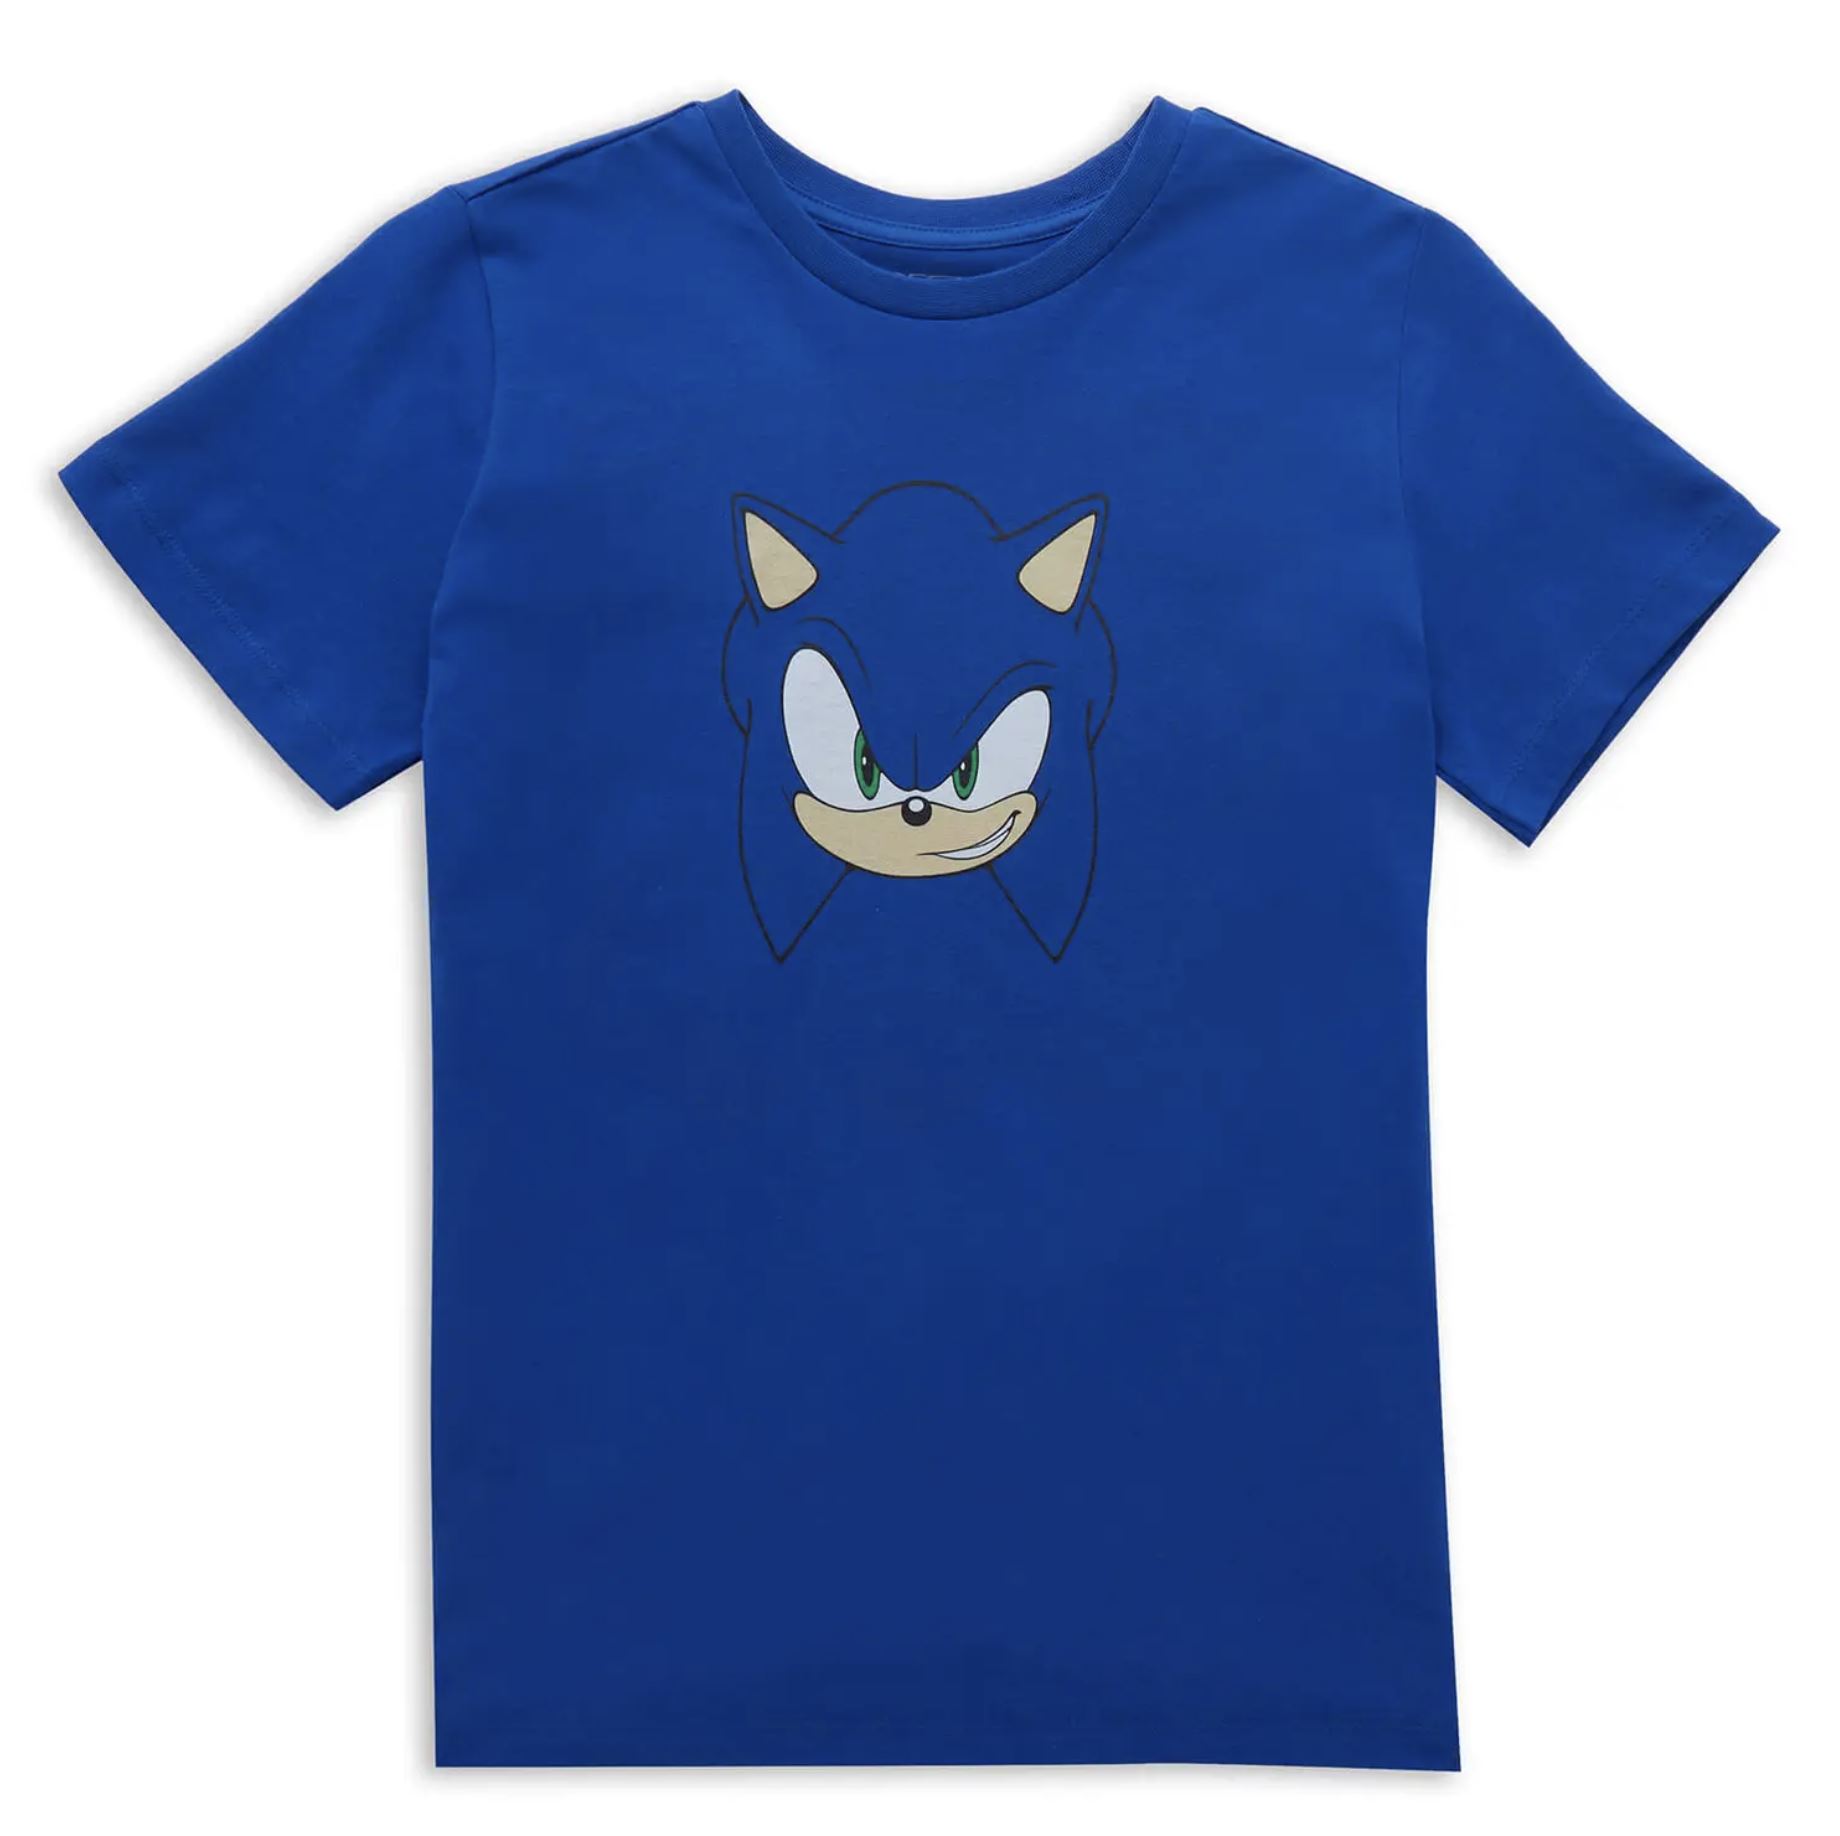 Kids' Graphic Tees: Sonic The Hedgehog, Jurassic Park, Harry Potter & More 5 for $25 + Free Shipping